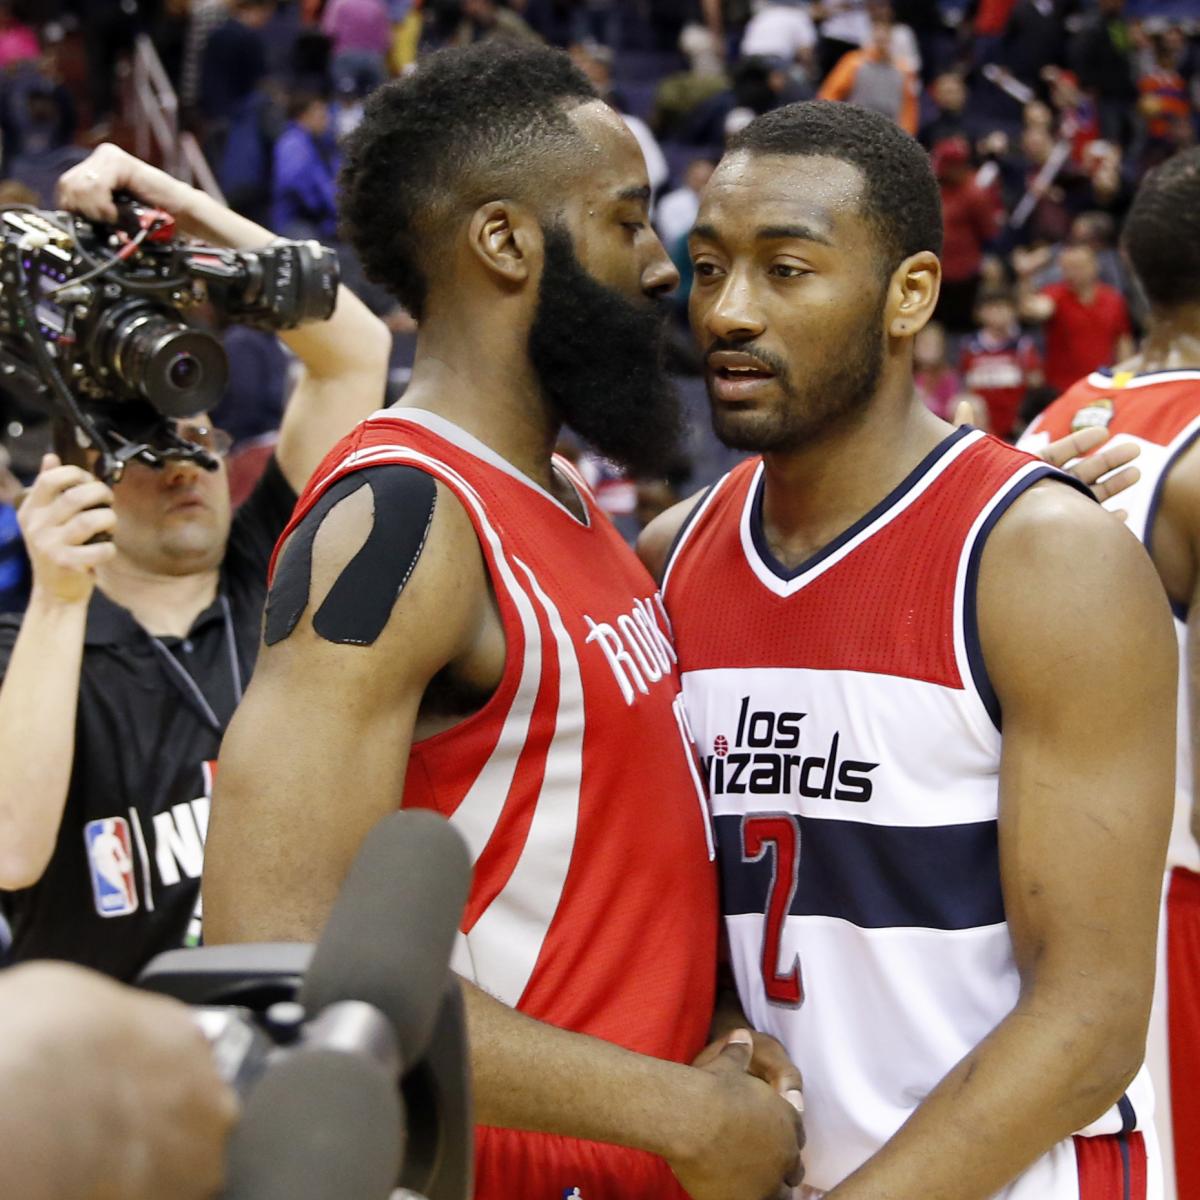 I don't want to ask him anything”: John Wall says he doesn't want to talk  to James Harden about leaving Rockets - The SportsRush